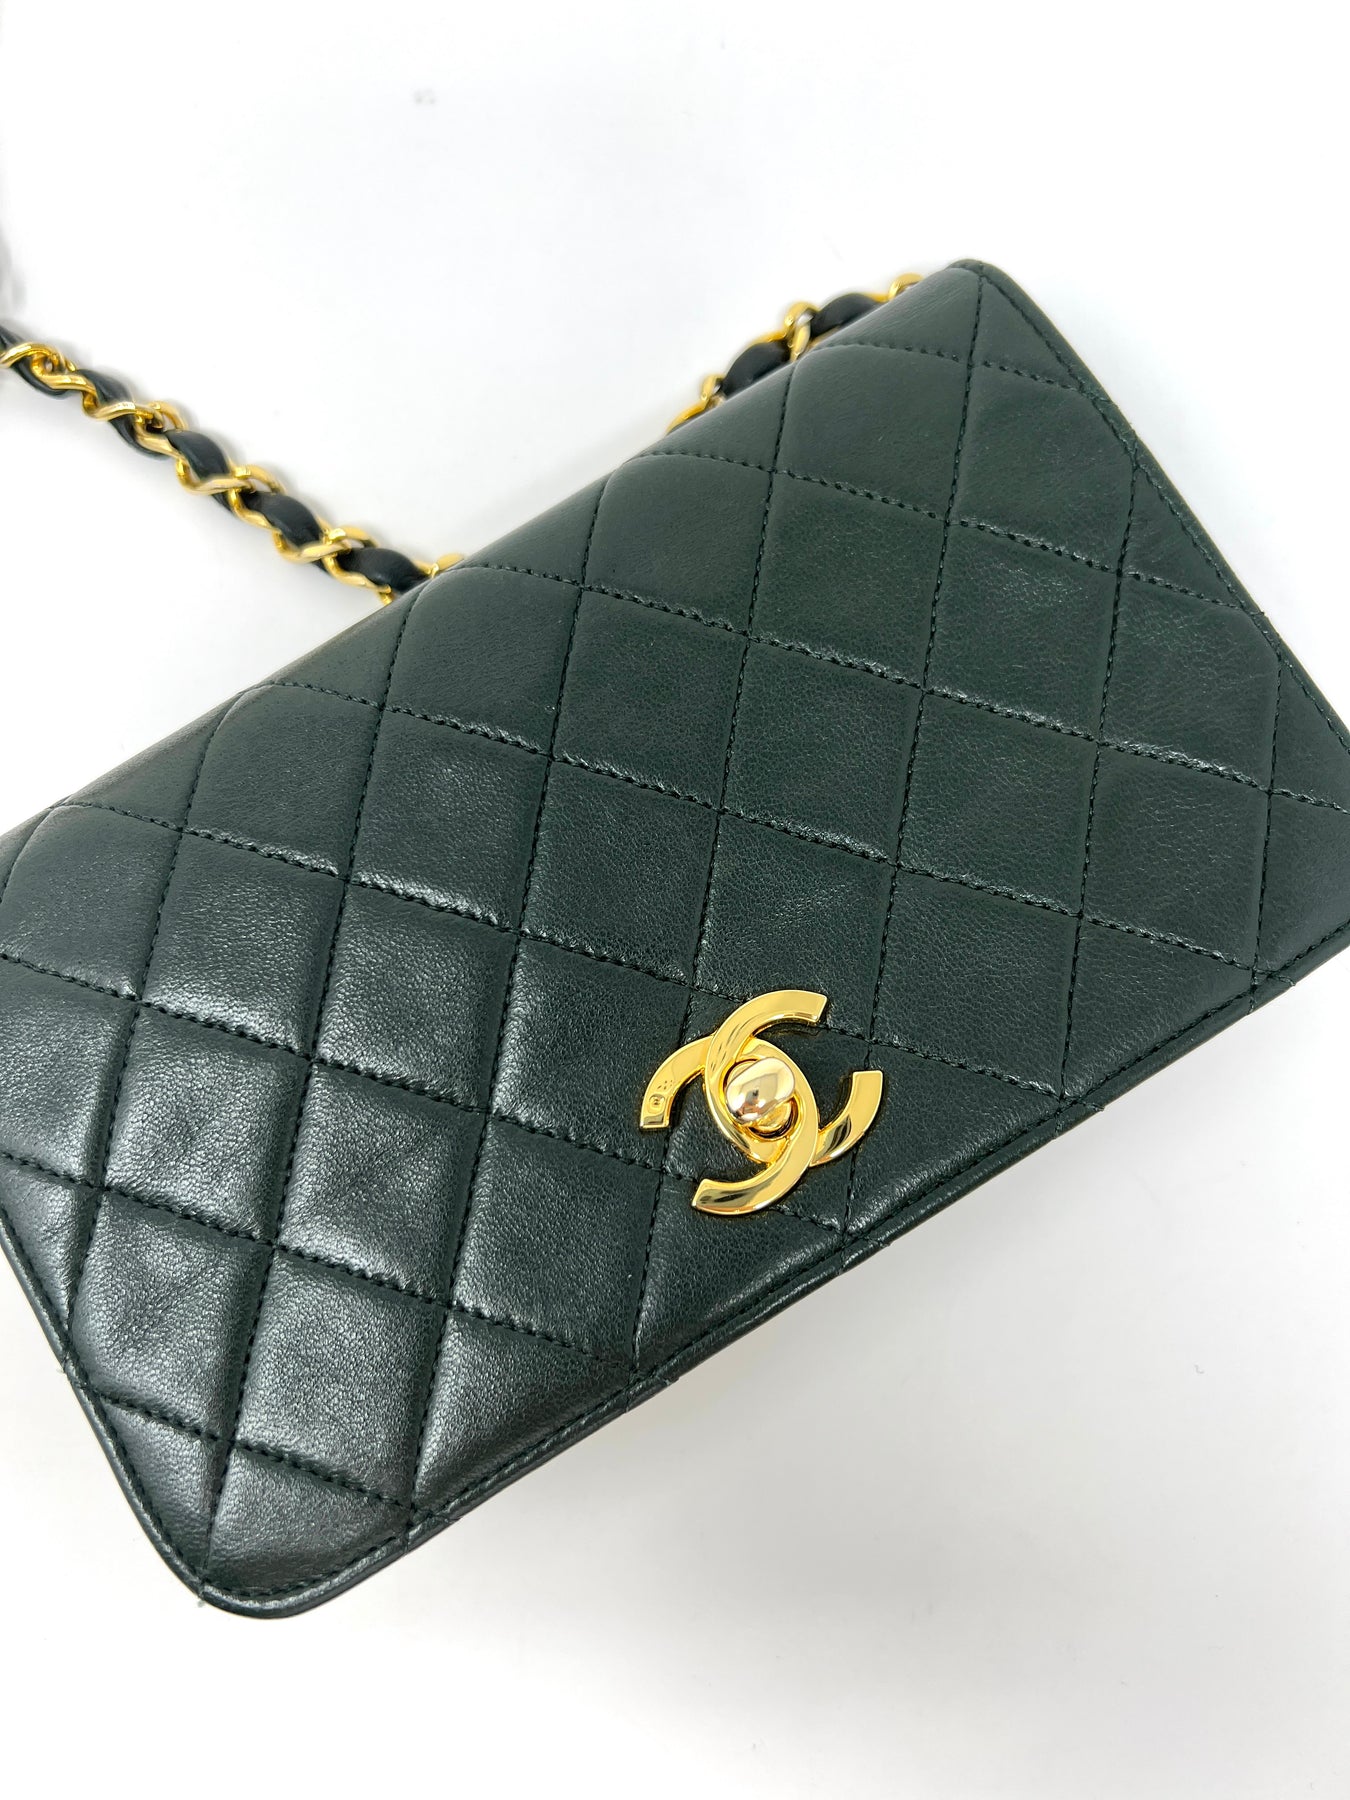 Rare Vintage 90's CHANEL Forest Green Flap Bag or Clutch